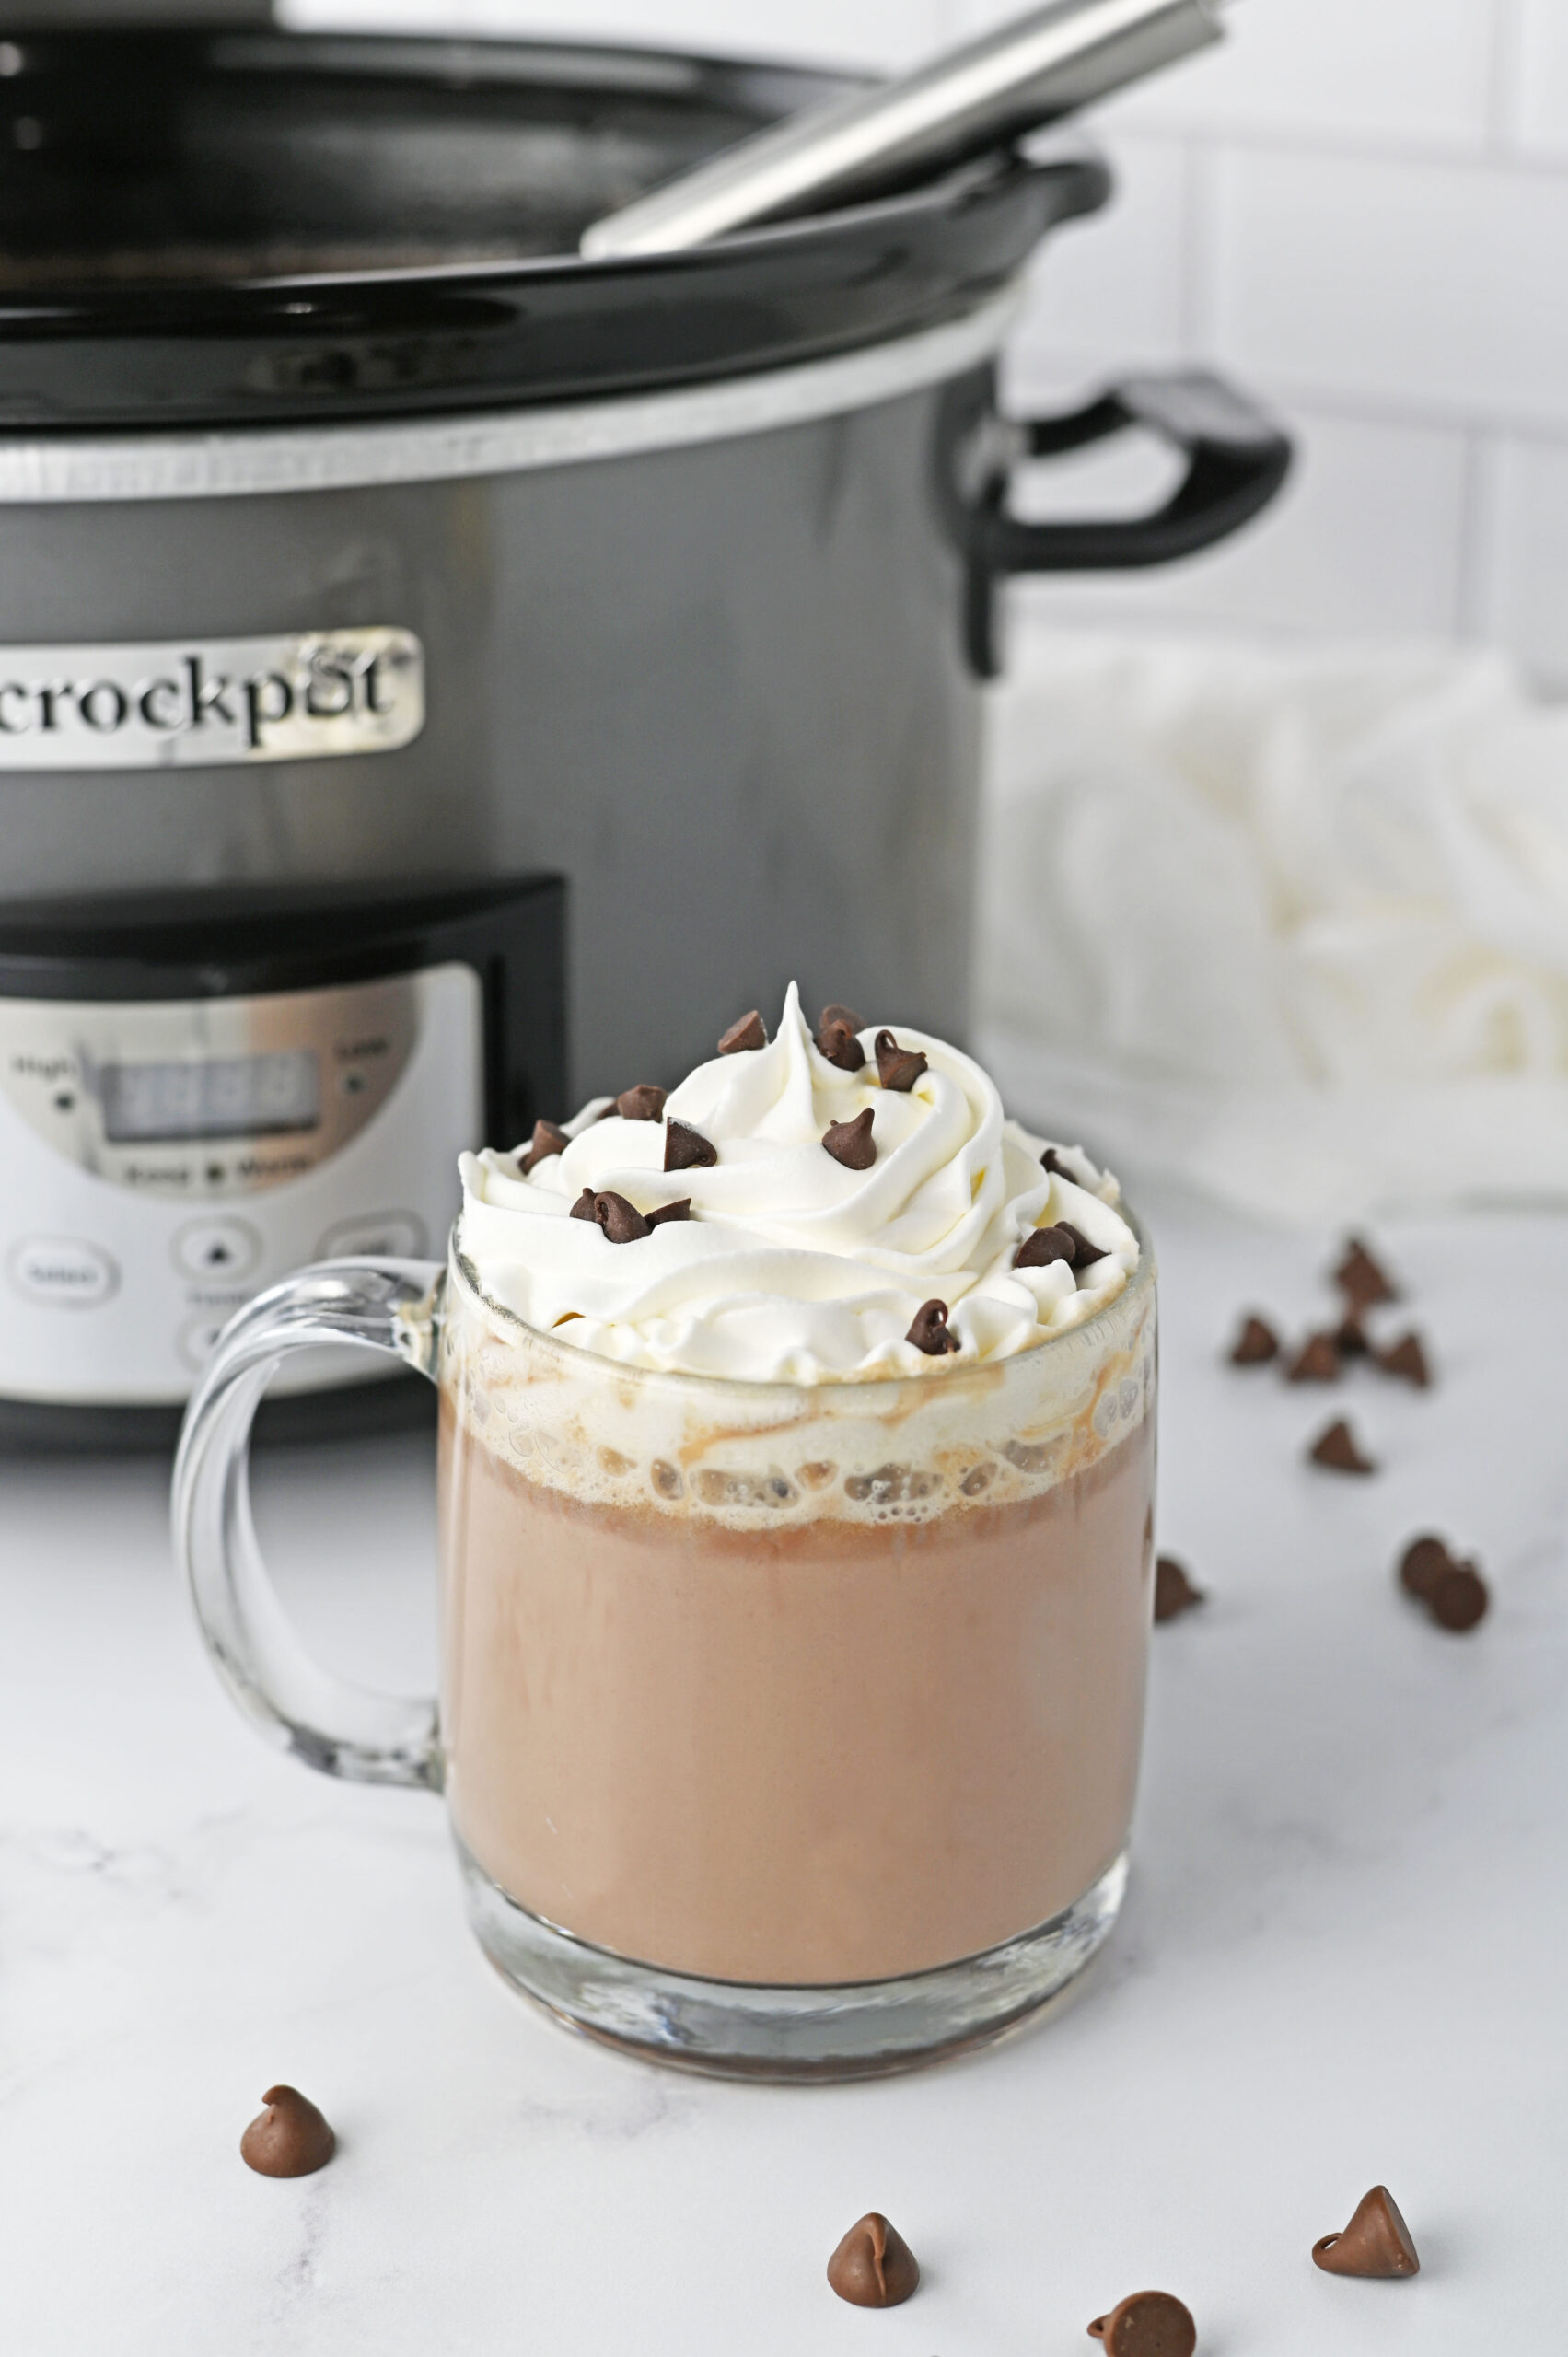 cup of slow cooker hot chocolate with whipped cream and chocolate shavings on top